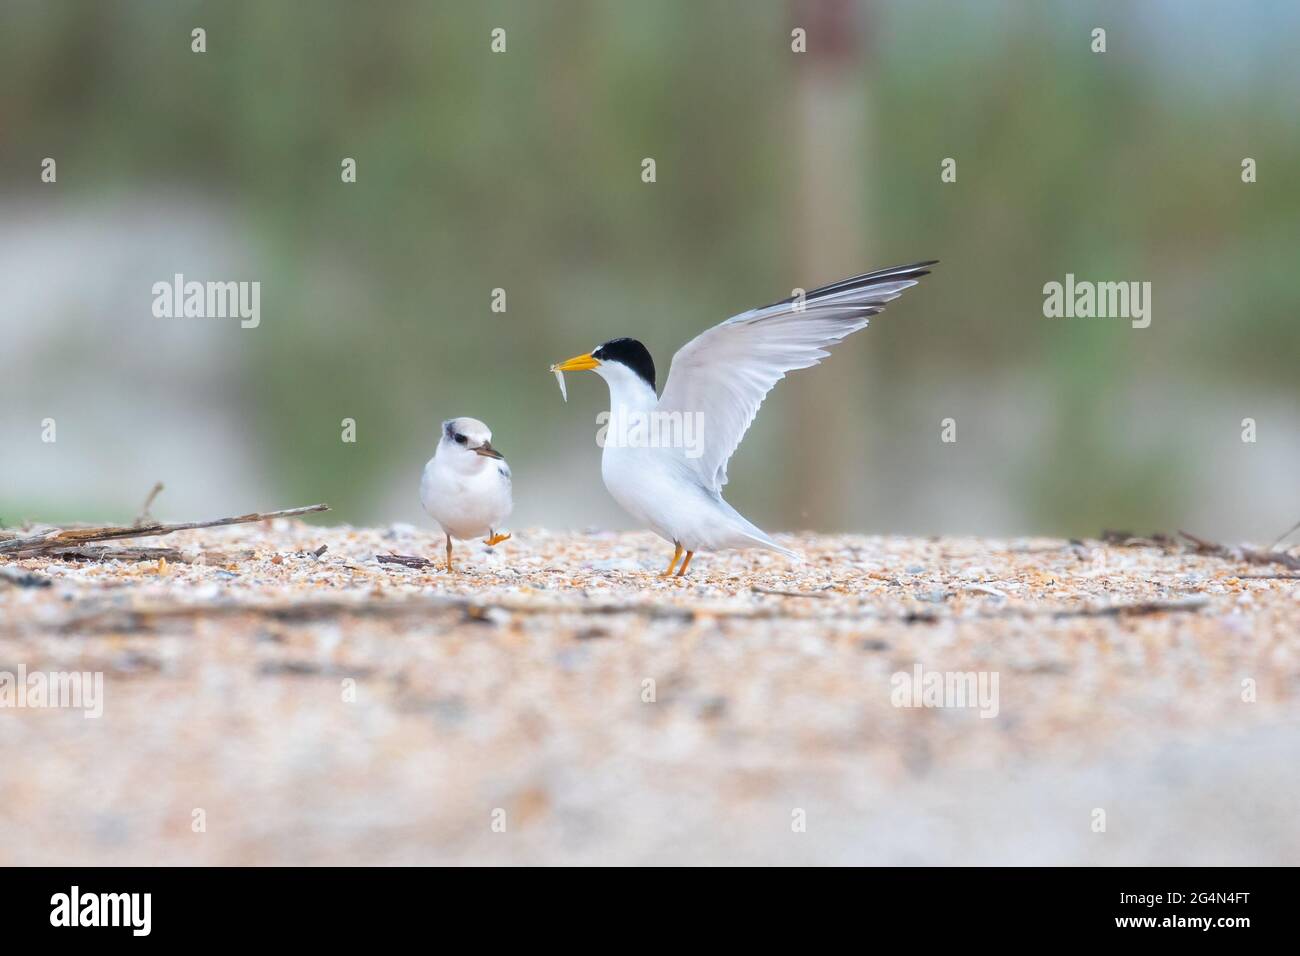 A least tern (Sternula antillarum) parent bringing a fish to its chick. Stock Photo